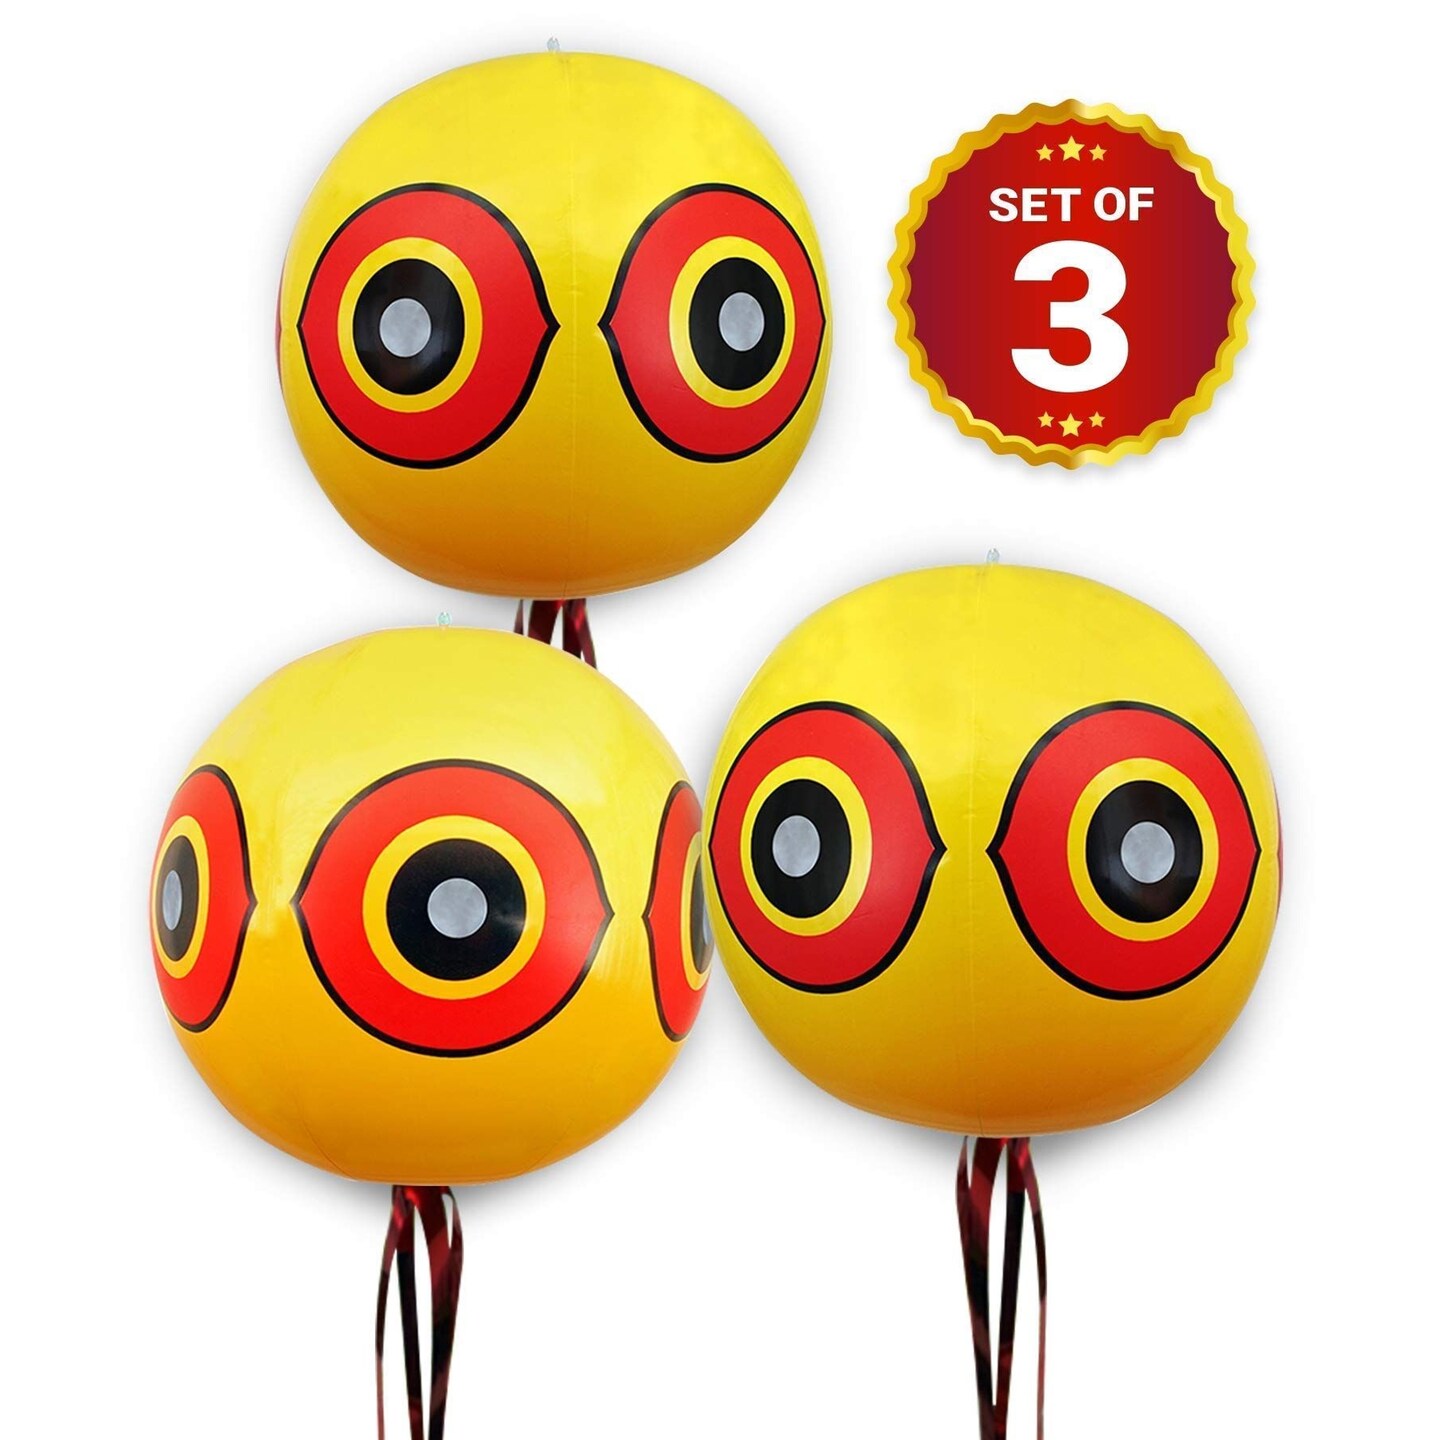 De-Bird Balloon Bird Repellent ,3-Pk Fast and Effective Solution to Pest Problems, Scare Eyes Balloon to Scare Birds Away from Pool and Garden Crops